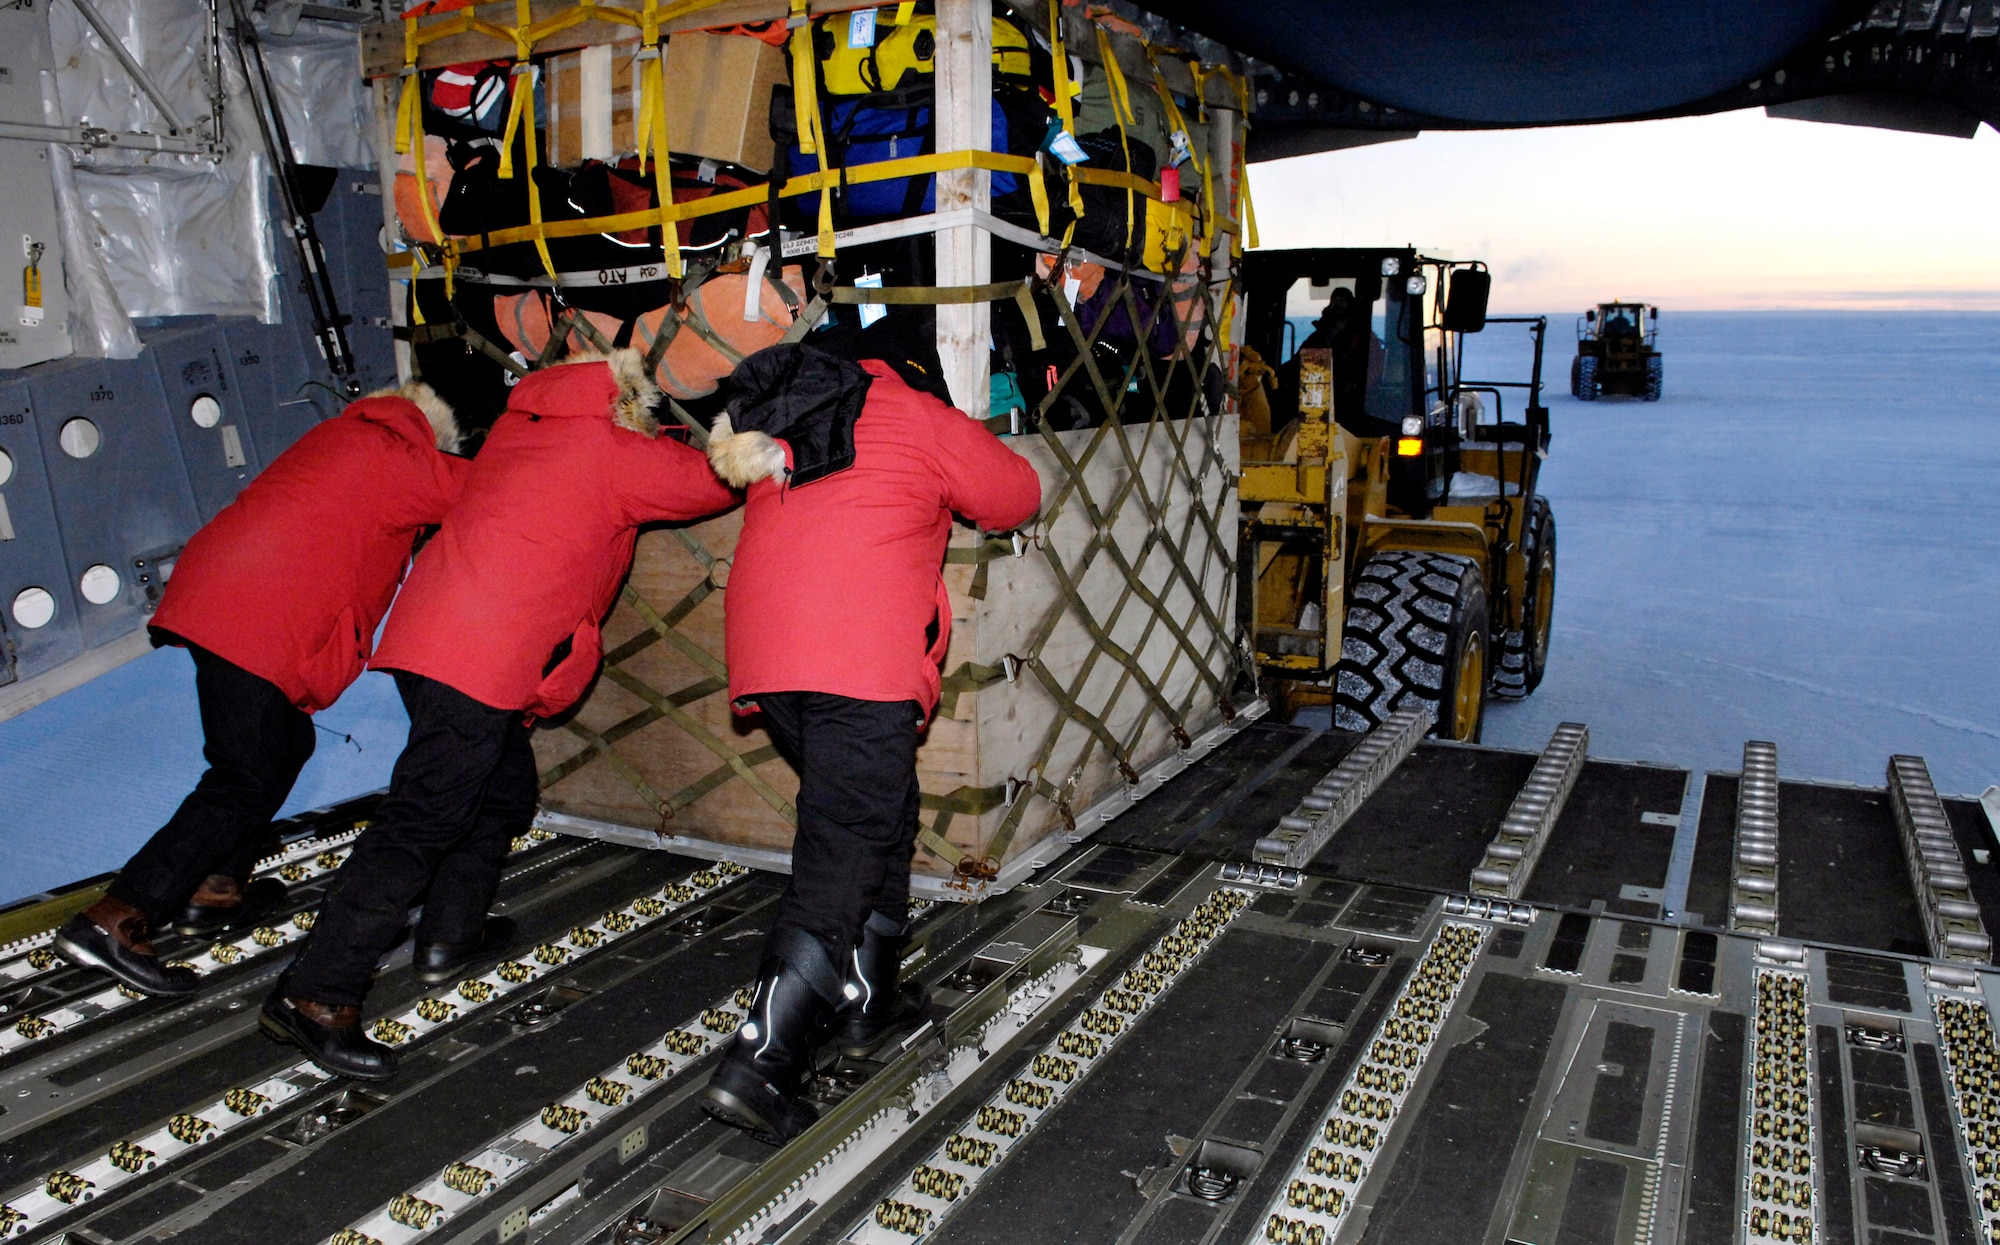 Loadmasters unload a pallet from their C-17 Globemaster III during the winter fly-in for Operation Deep Freeze Aug. 20 at Pegasus Runway in Antarctica. A C-17 and 31 Airmen from McChord Air Force Base, Wash., began the annual winter fly-in augmentation of scientists, support personnel, food and equipment for the U.S. Antarctic Program at McMurdo Station. WinFly is the opening of the first flights to McMurdo Station, which closed for the austral winter in February. (U.S. Air Force photo/Tech. Sgt. Shane A. Cuomo) 